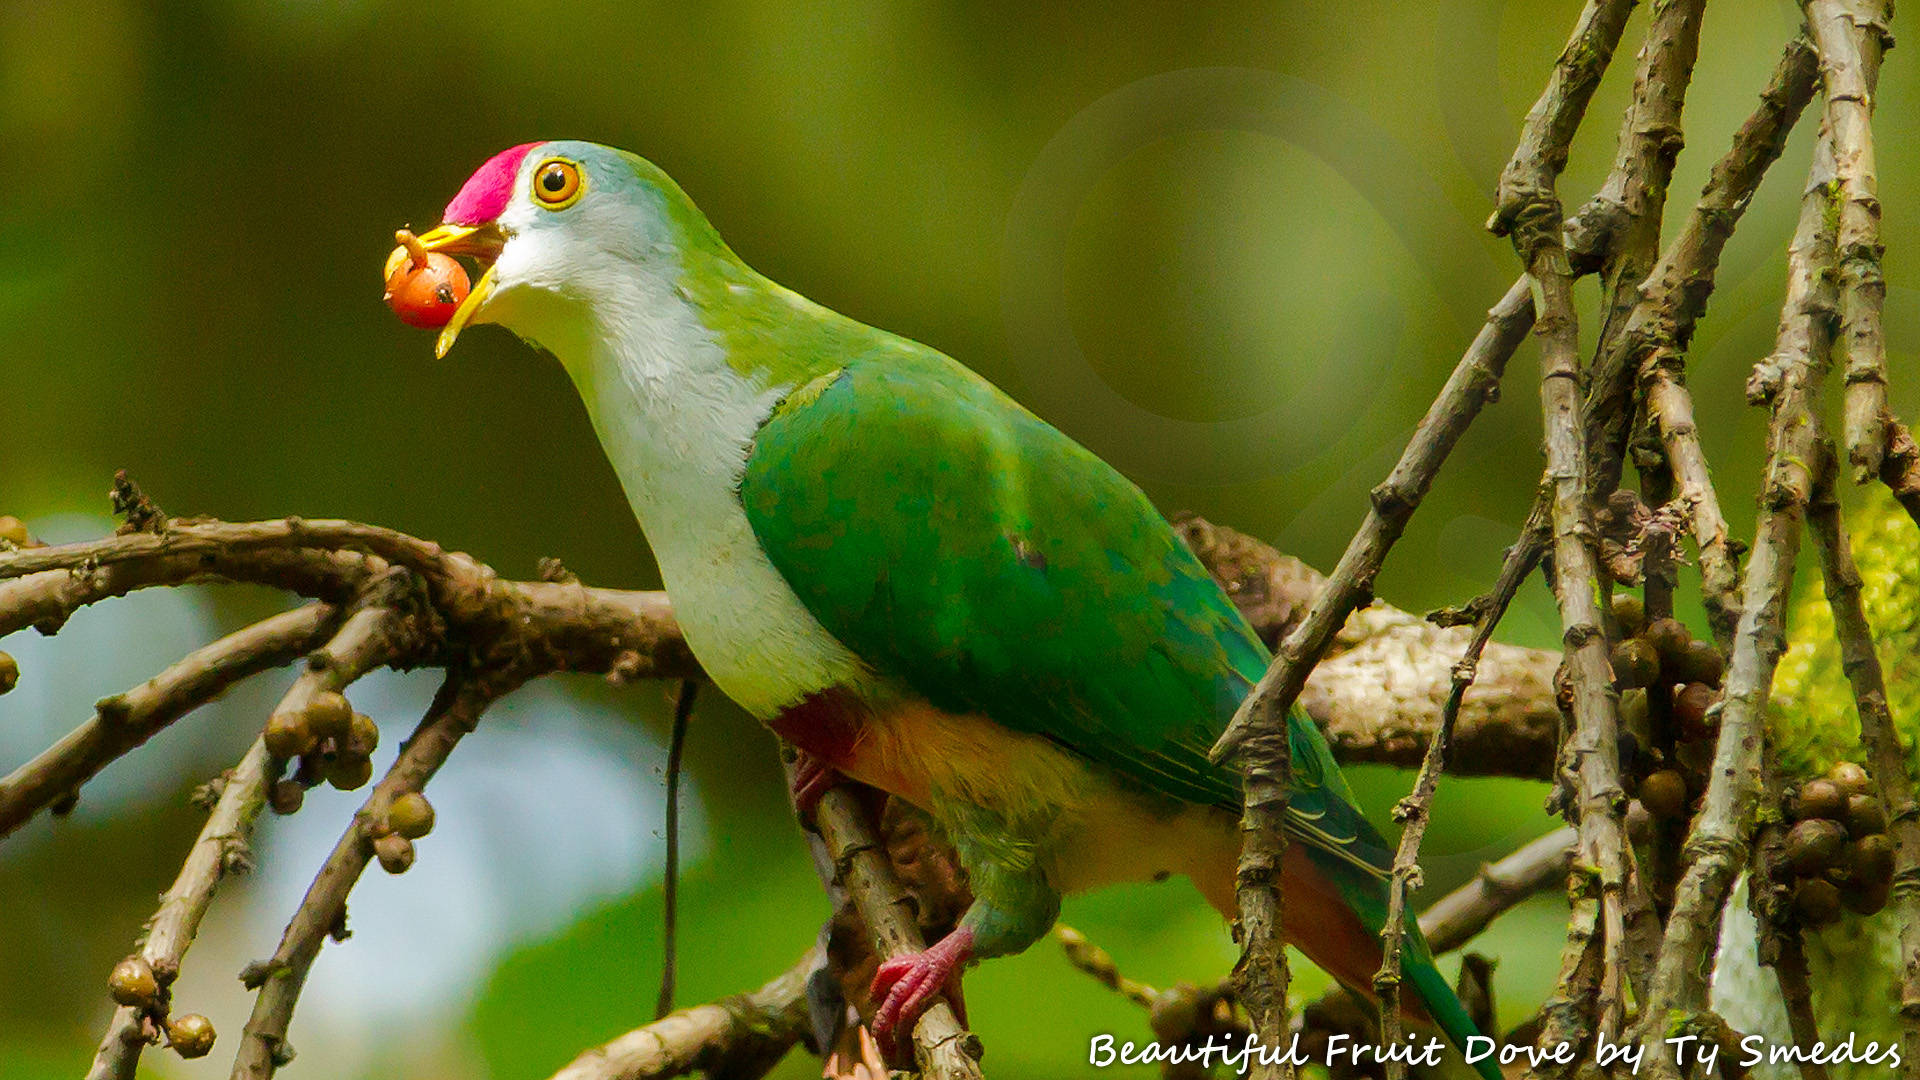 The lowland-dwelling Beautiful Fruit Dove Ptilinopus pulchellus is one of 290 New Guinea endemics in West Papua that always is a thrill to see. Copyright © Ty Smedes